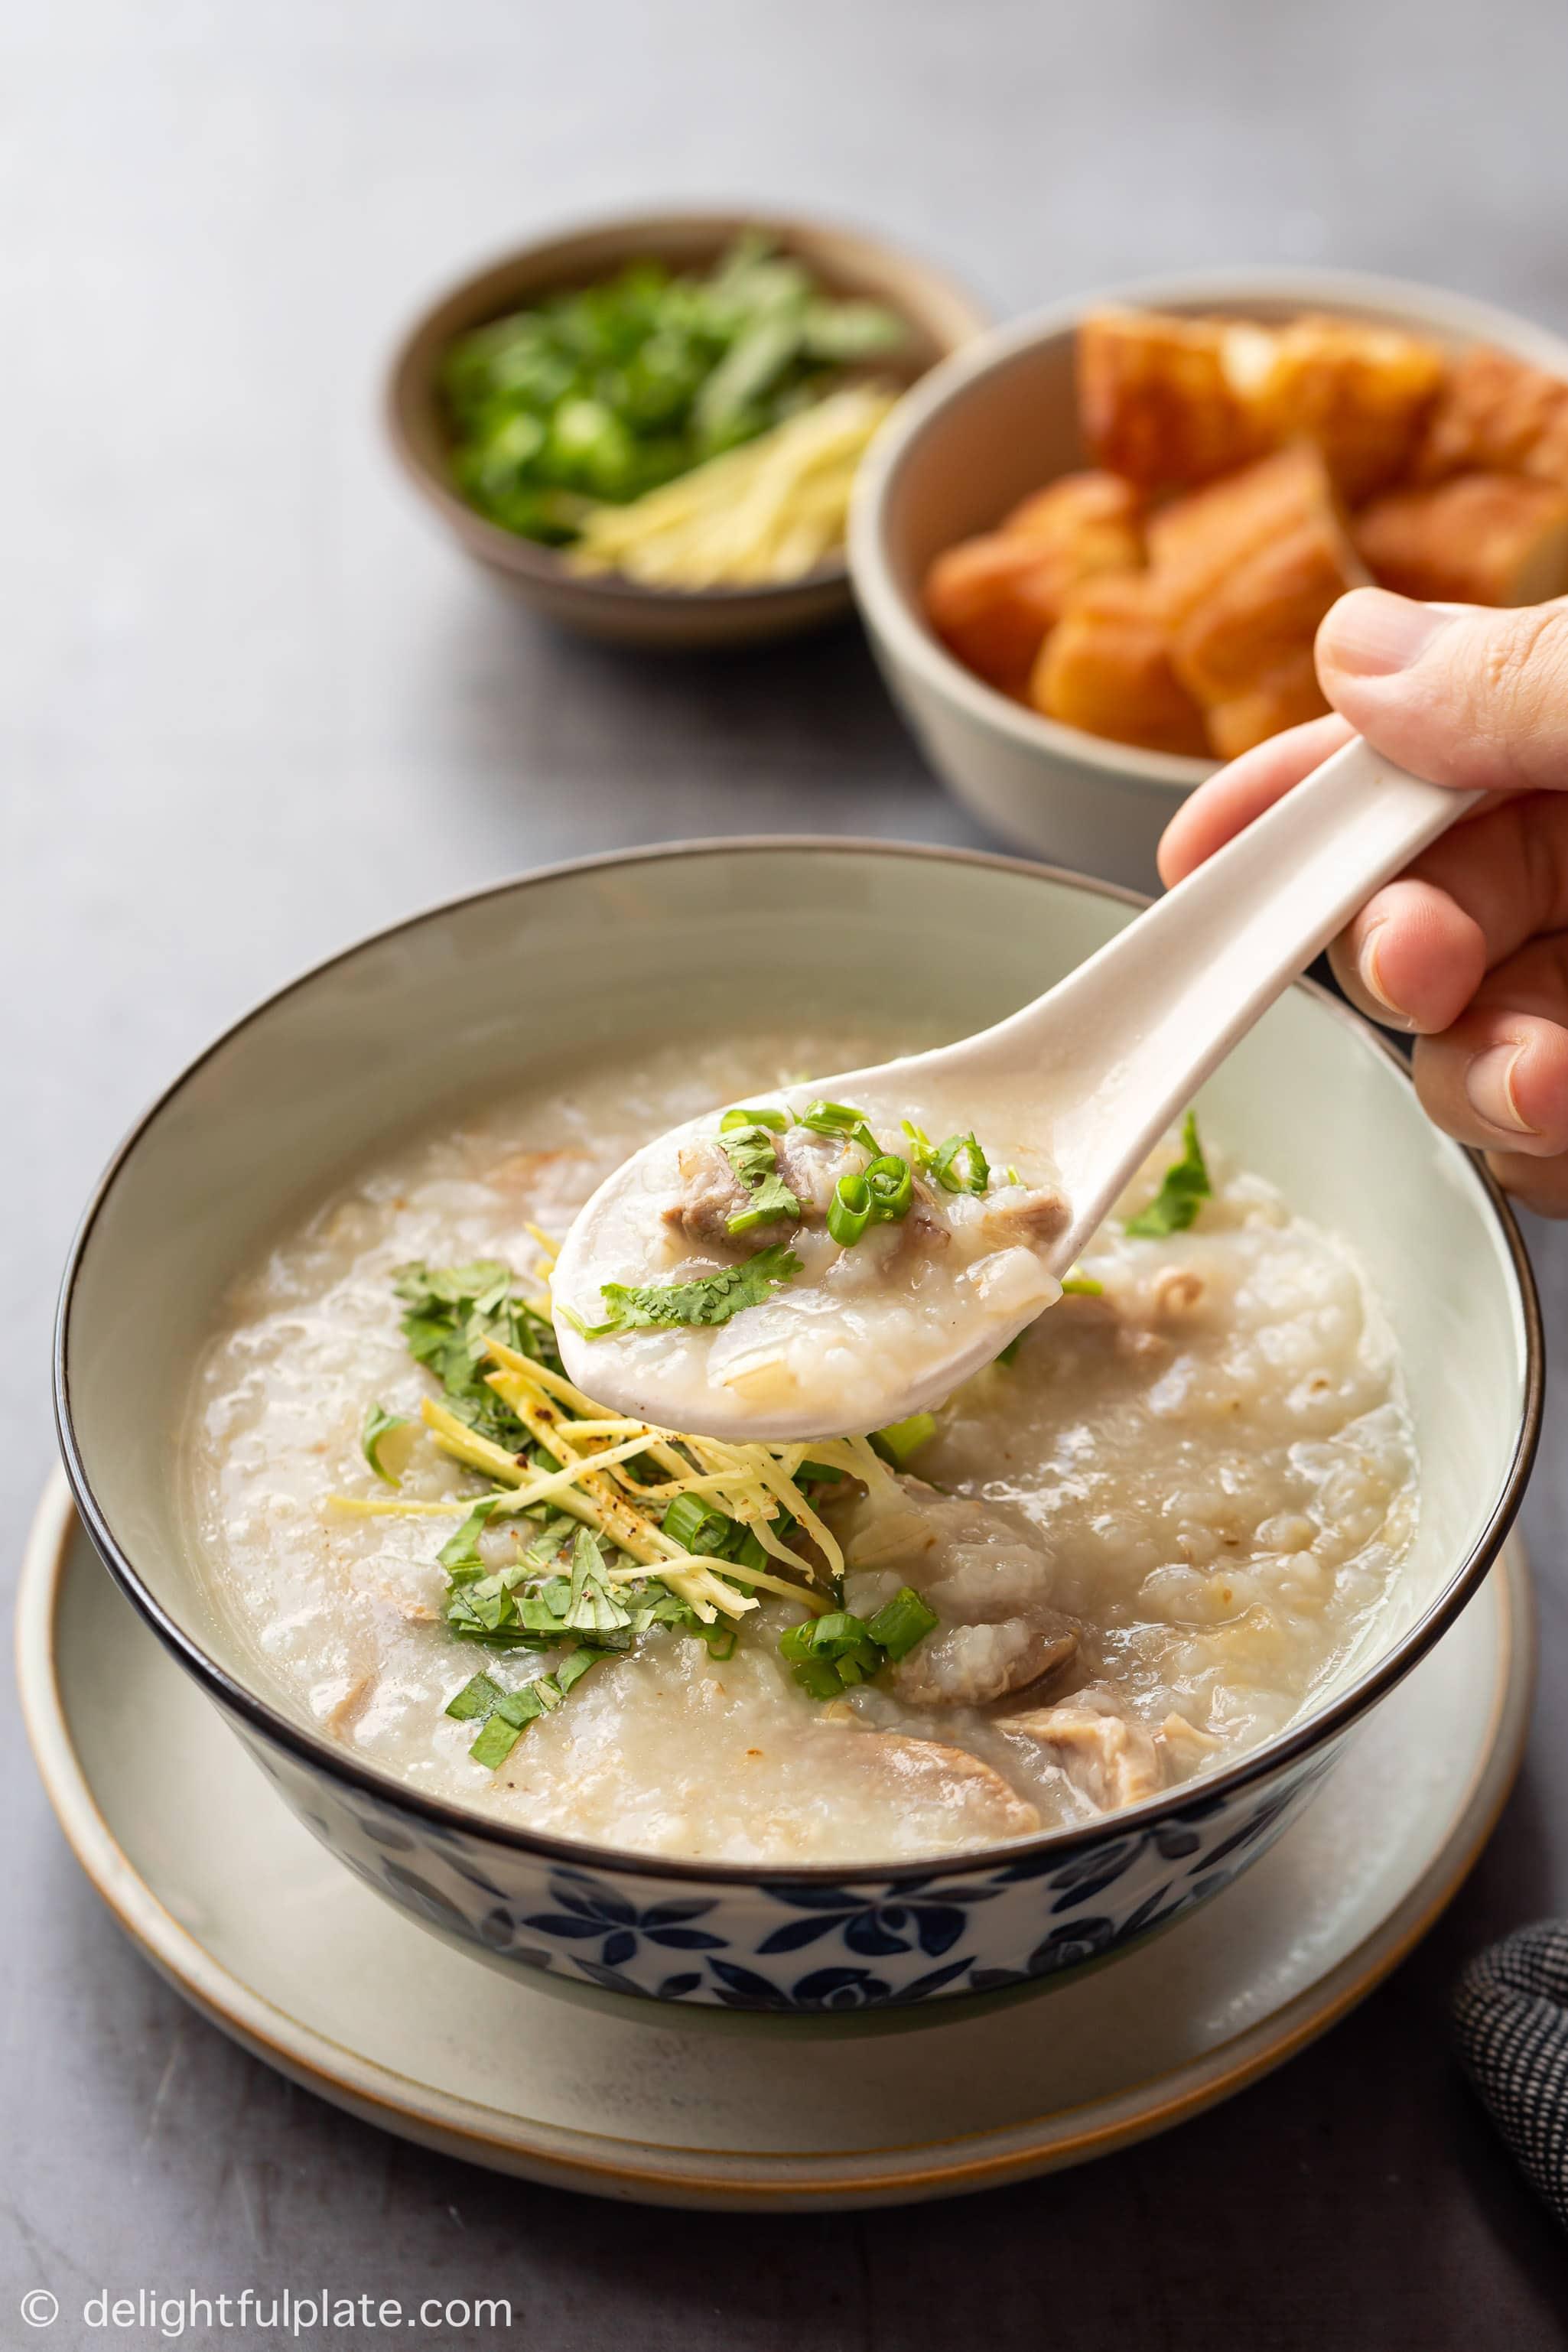 a bowl of duck congee, served with fried dough sticks (youtiao)